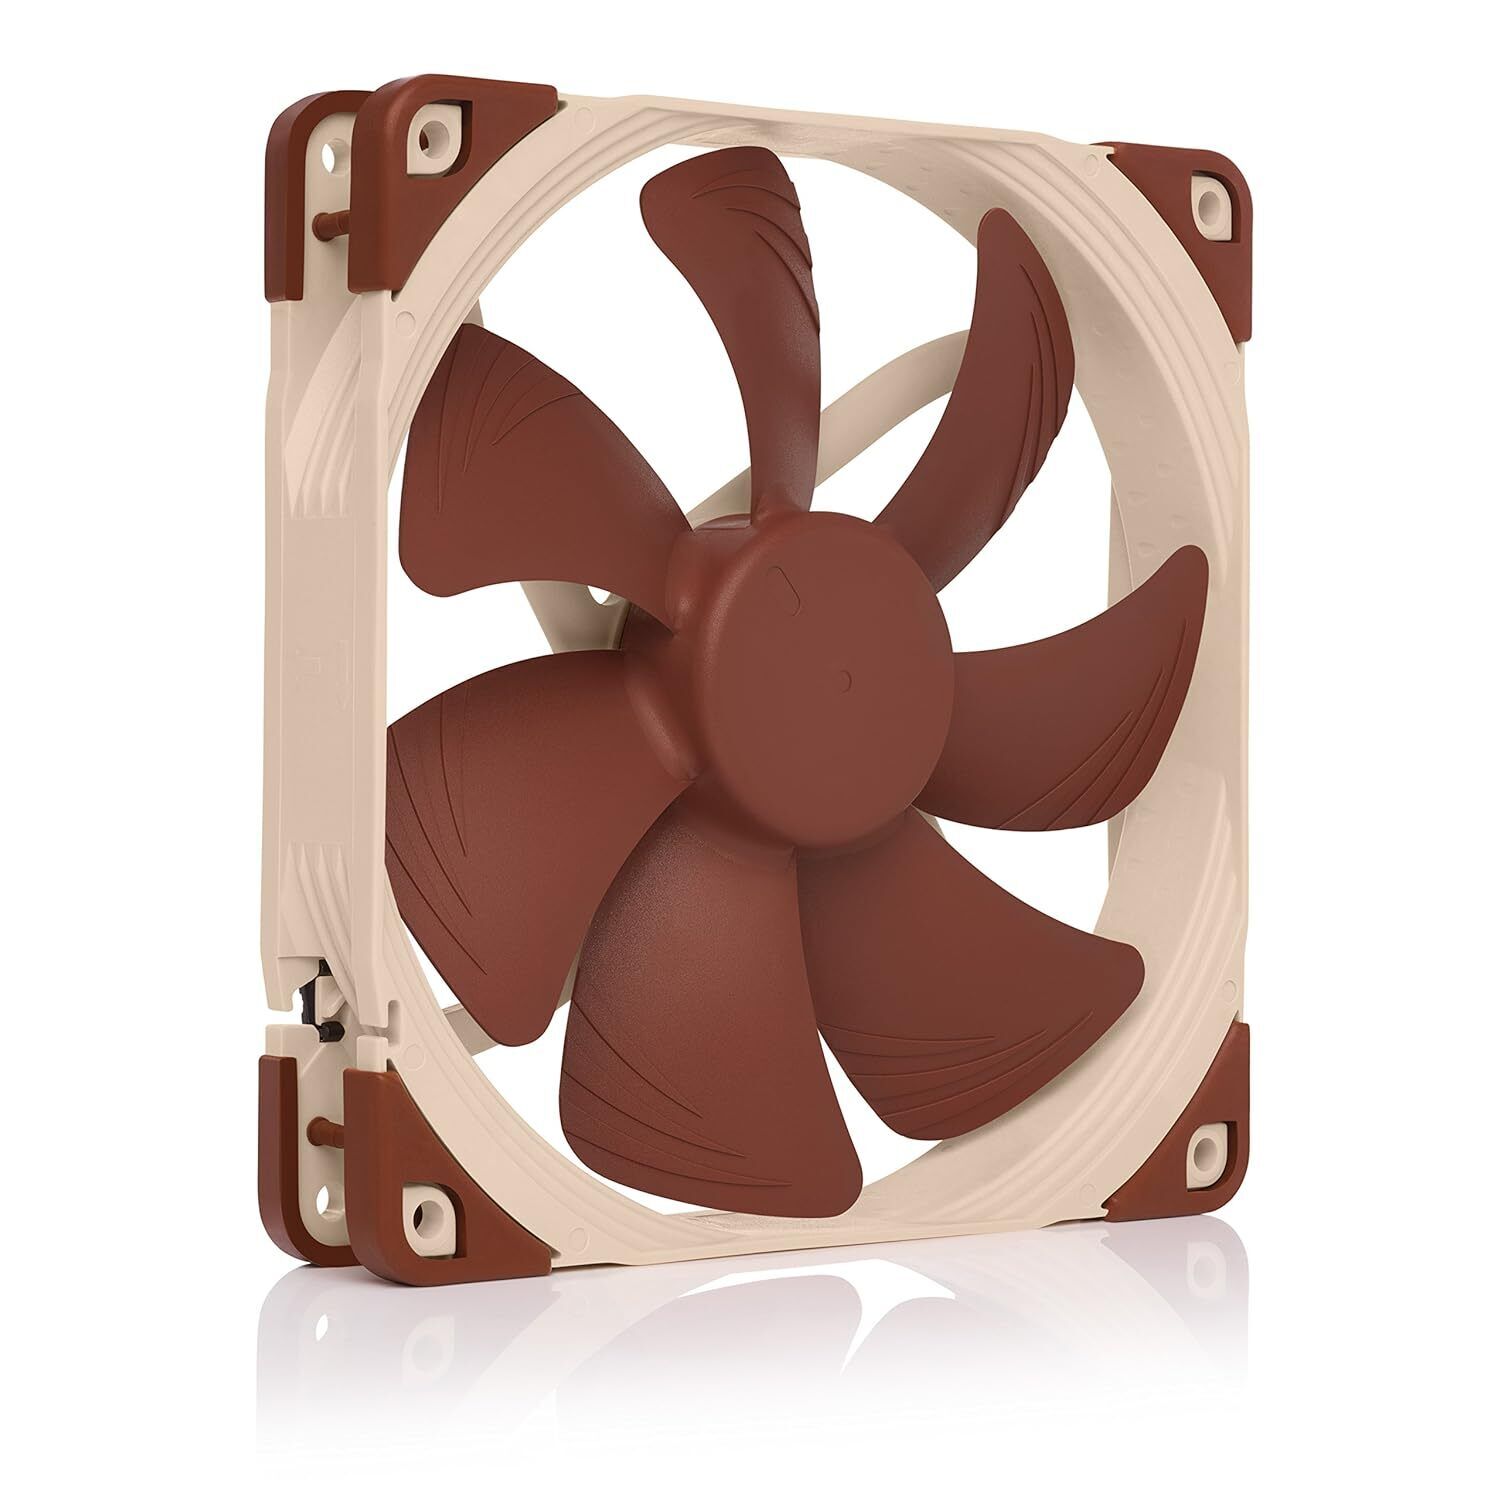 Noctua NF-A14 5V PWM, Premium Quiet Fan with USB Power Adaptor Cable, 4-Pin, 5